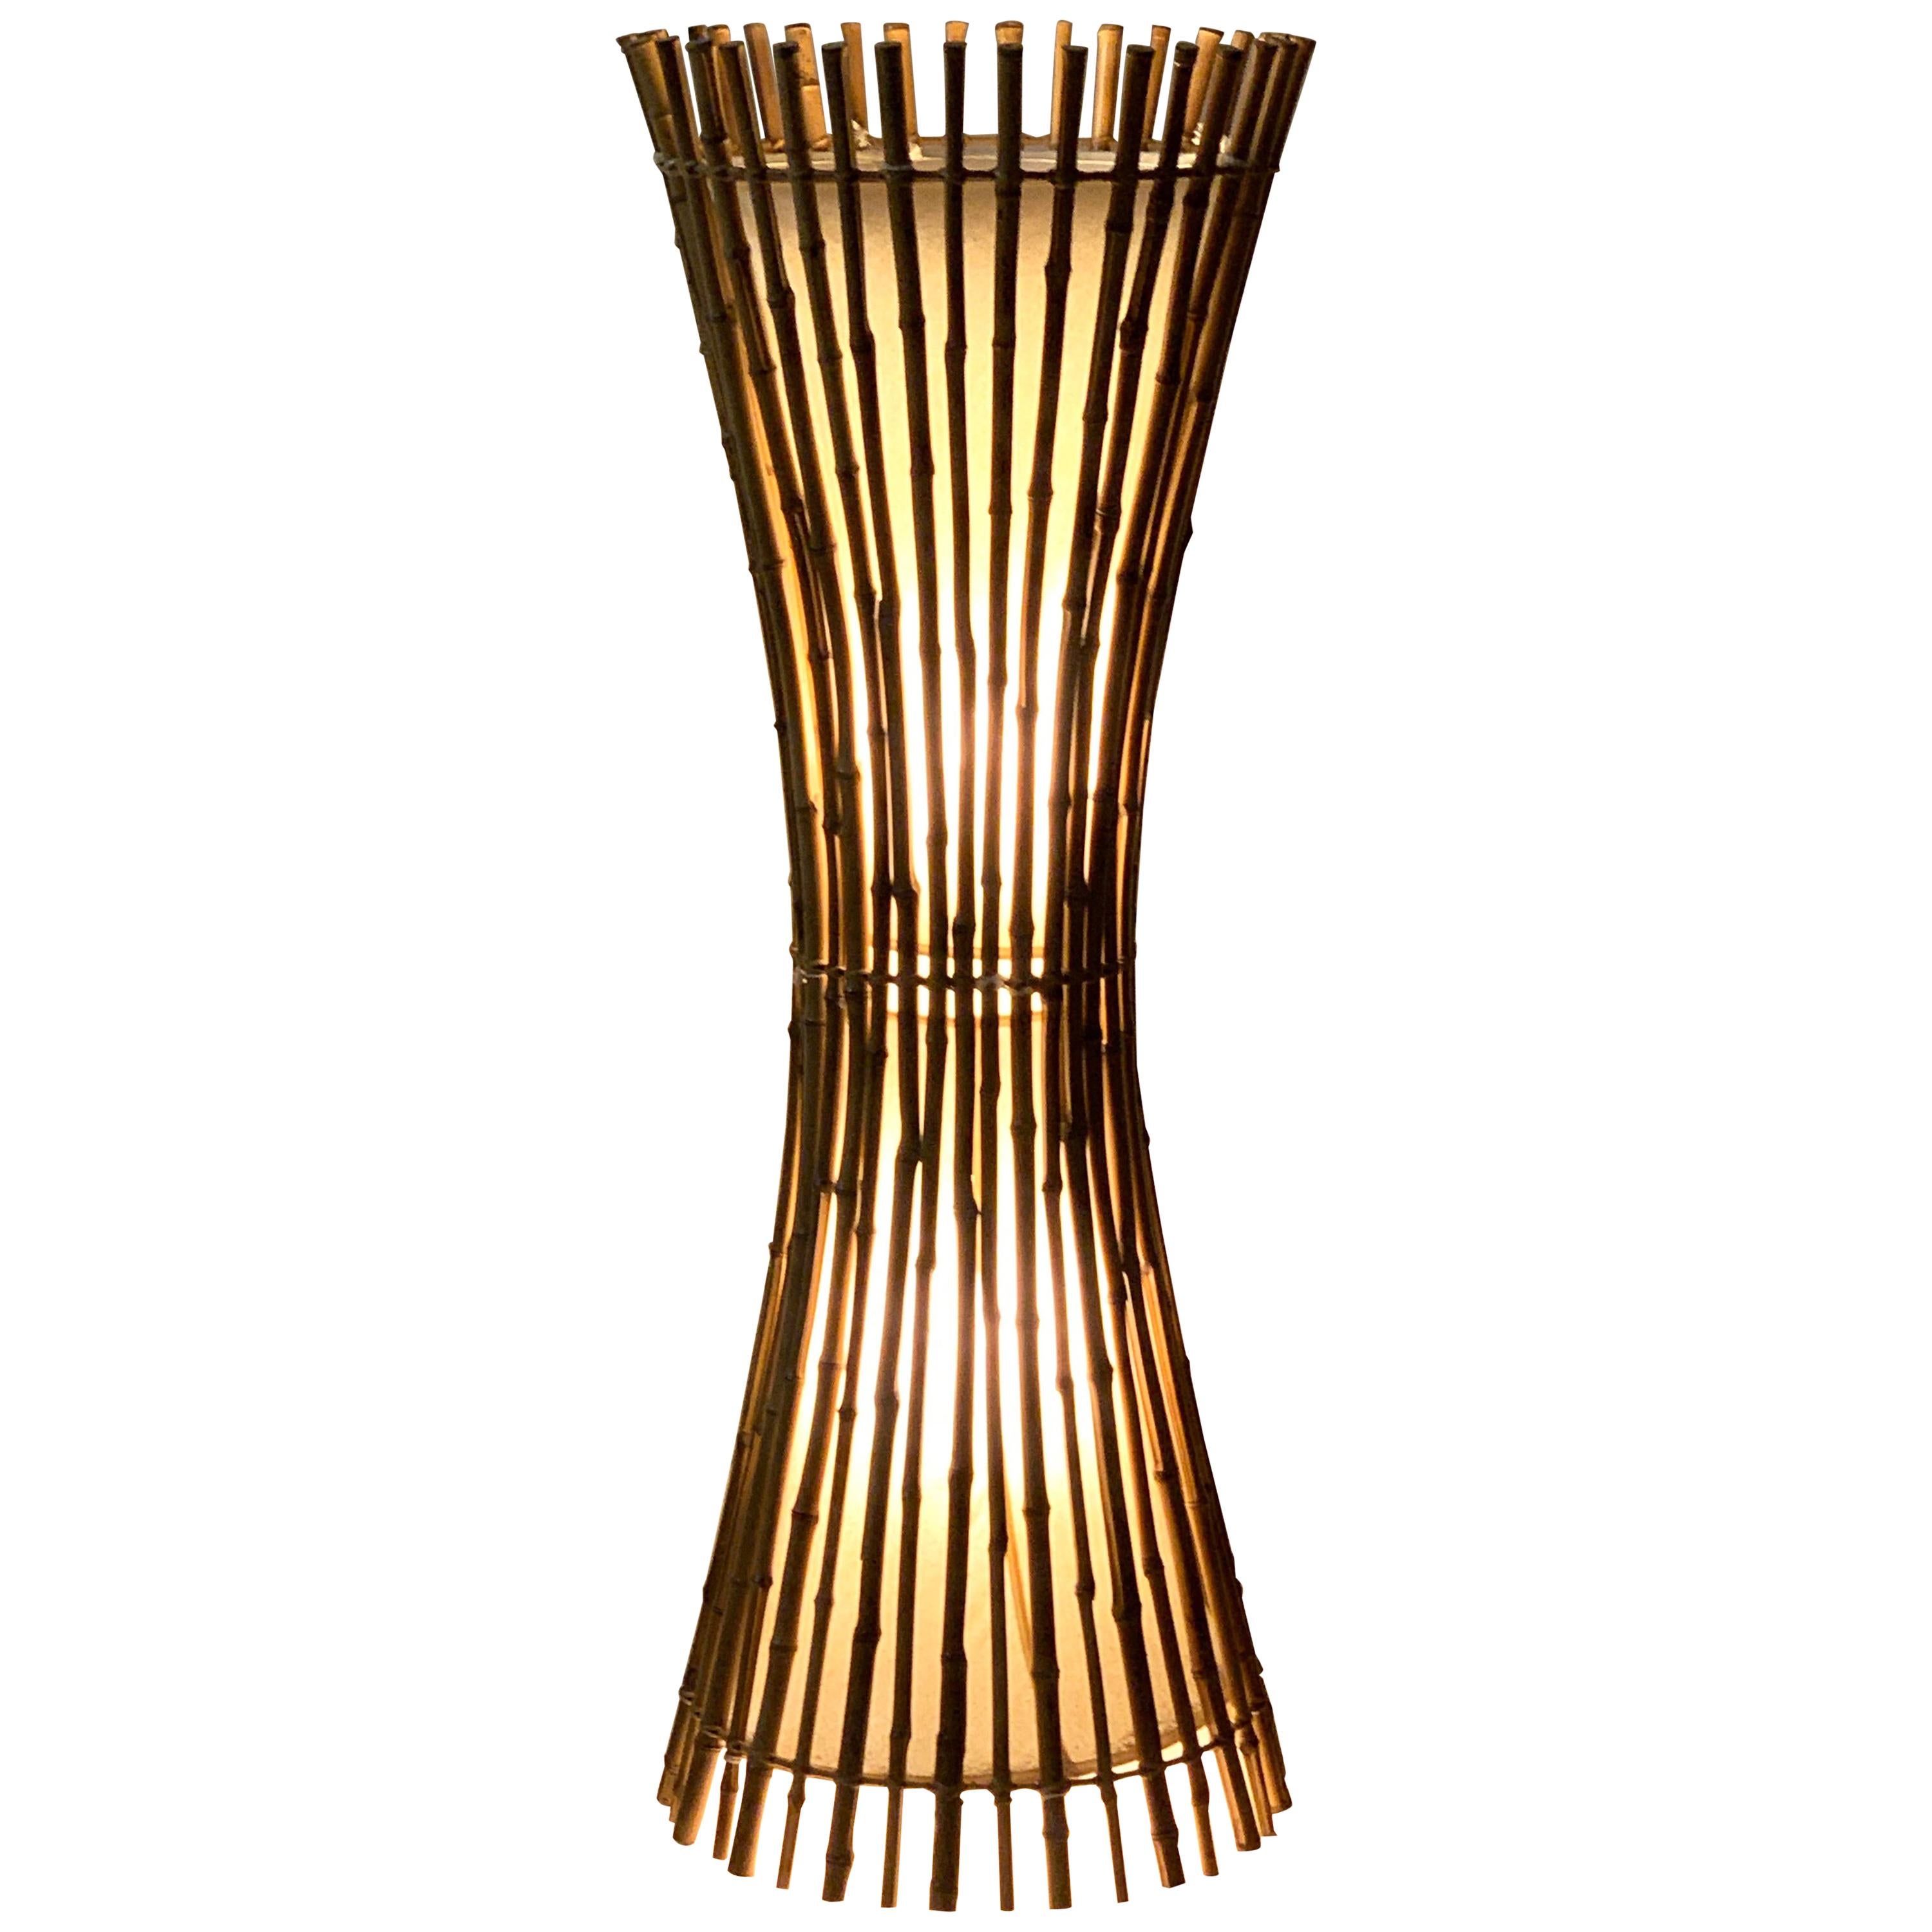 Midcentury Bamboo and Rattan Italian Floor Lamp after Franco Albini, 1960s For Sale